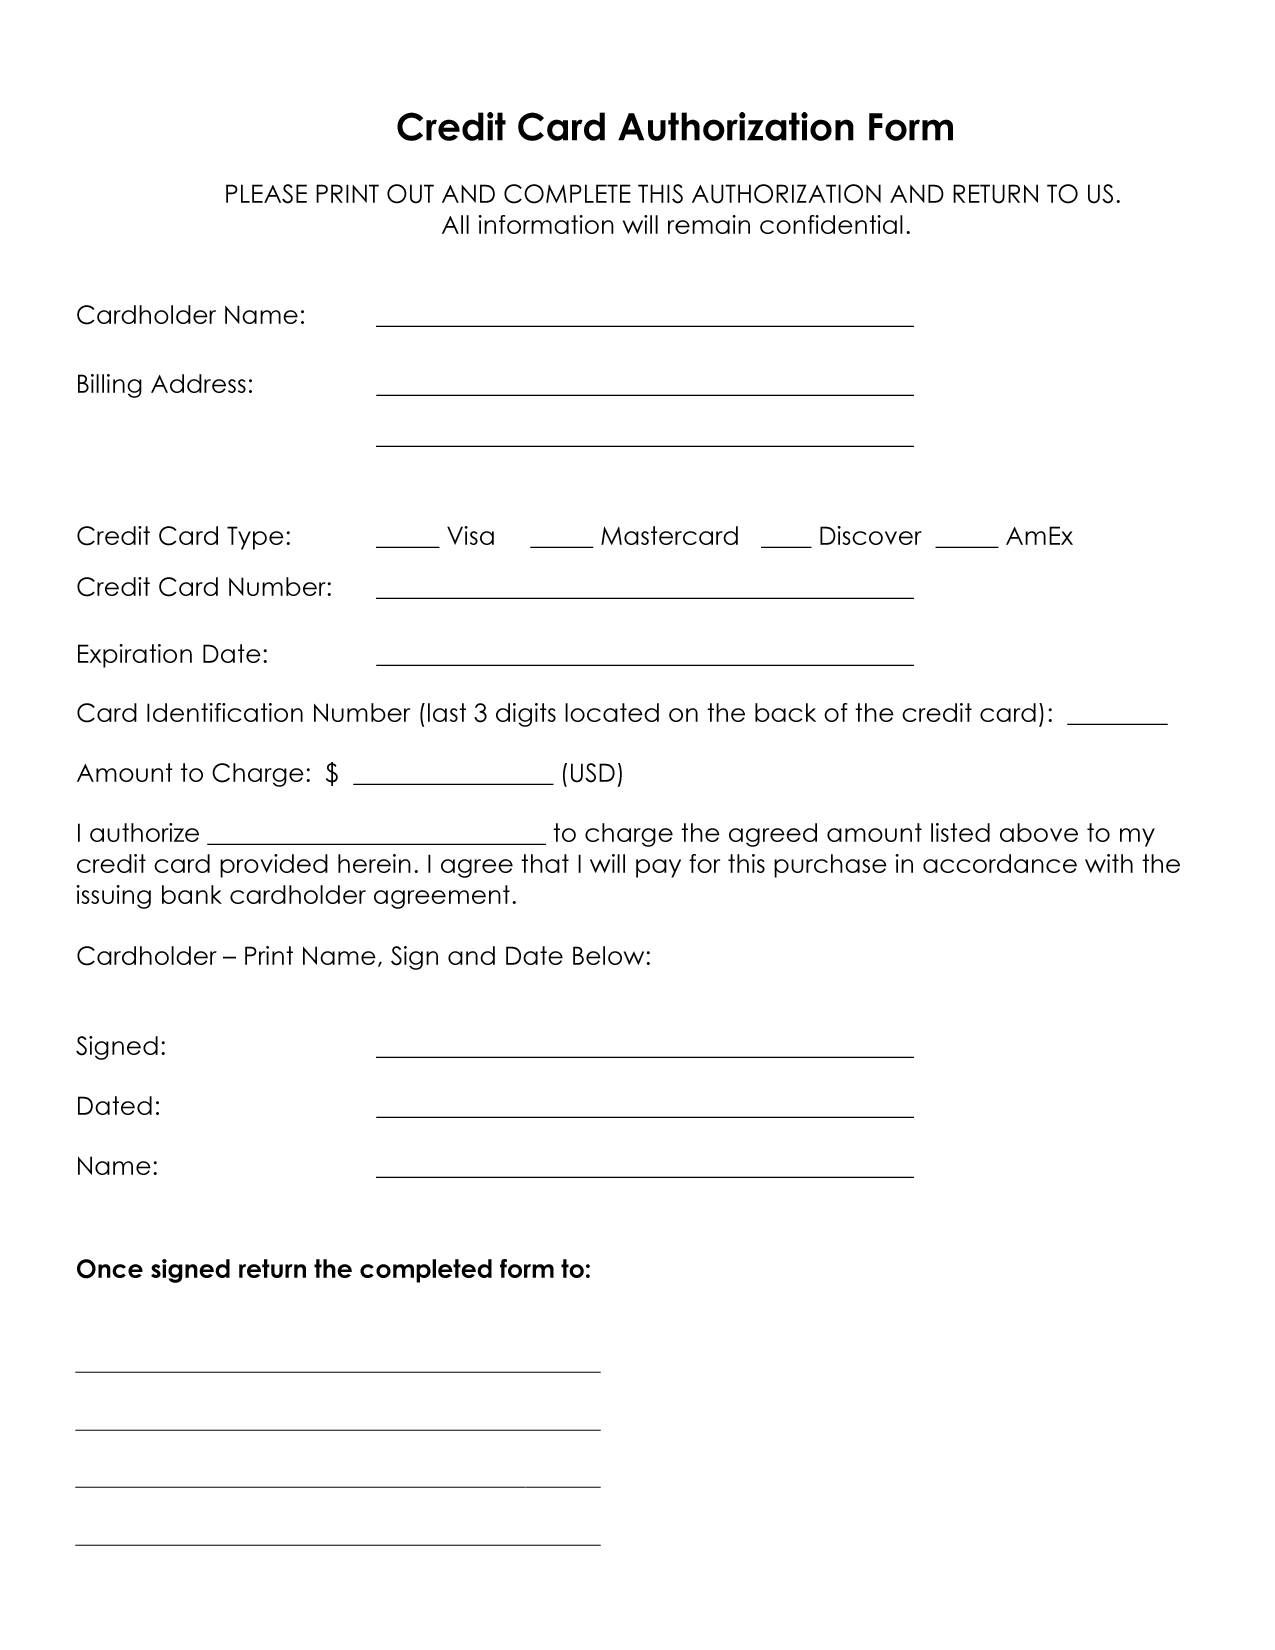 Credit Card Authorization Form Template In 2020 | Credit Throughout Credit Card Authorization Form Template Word